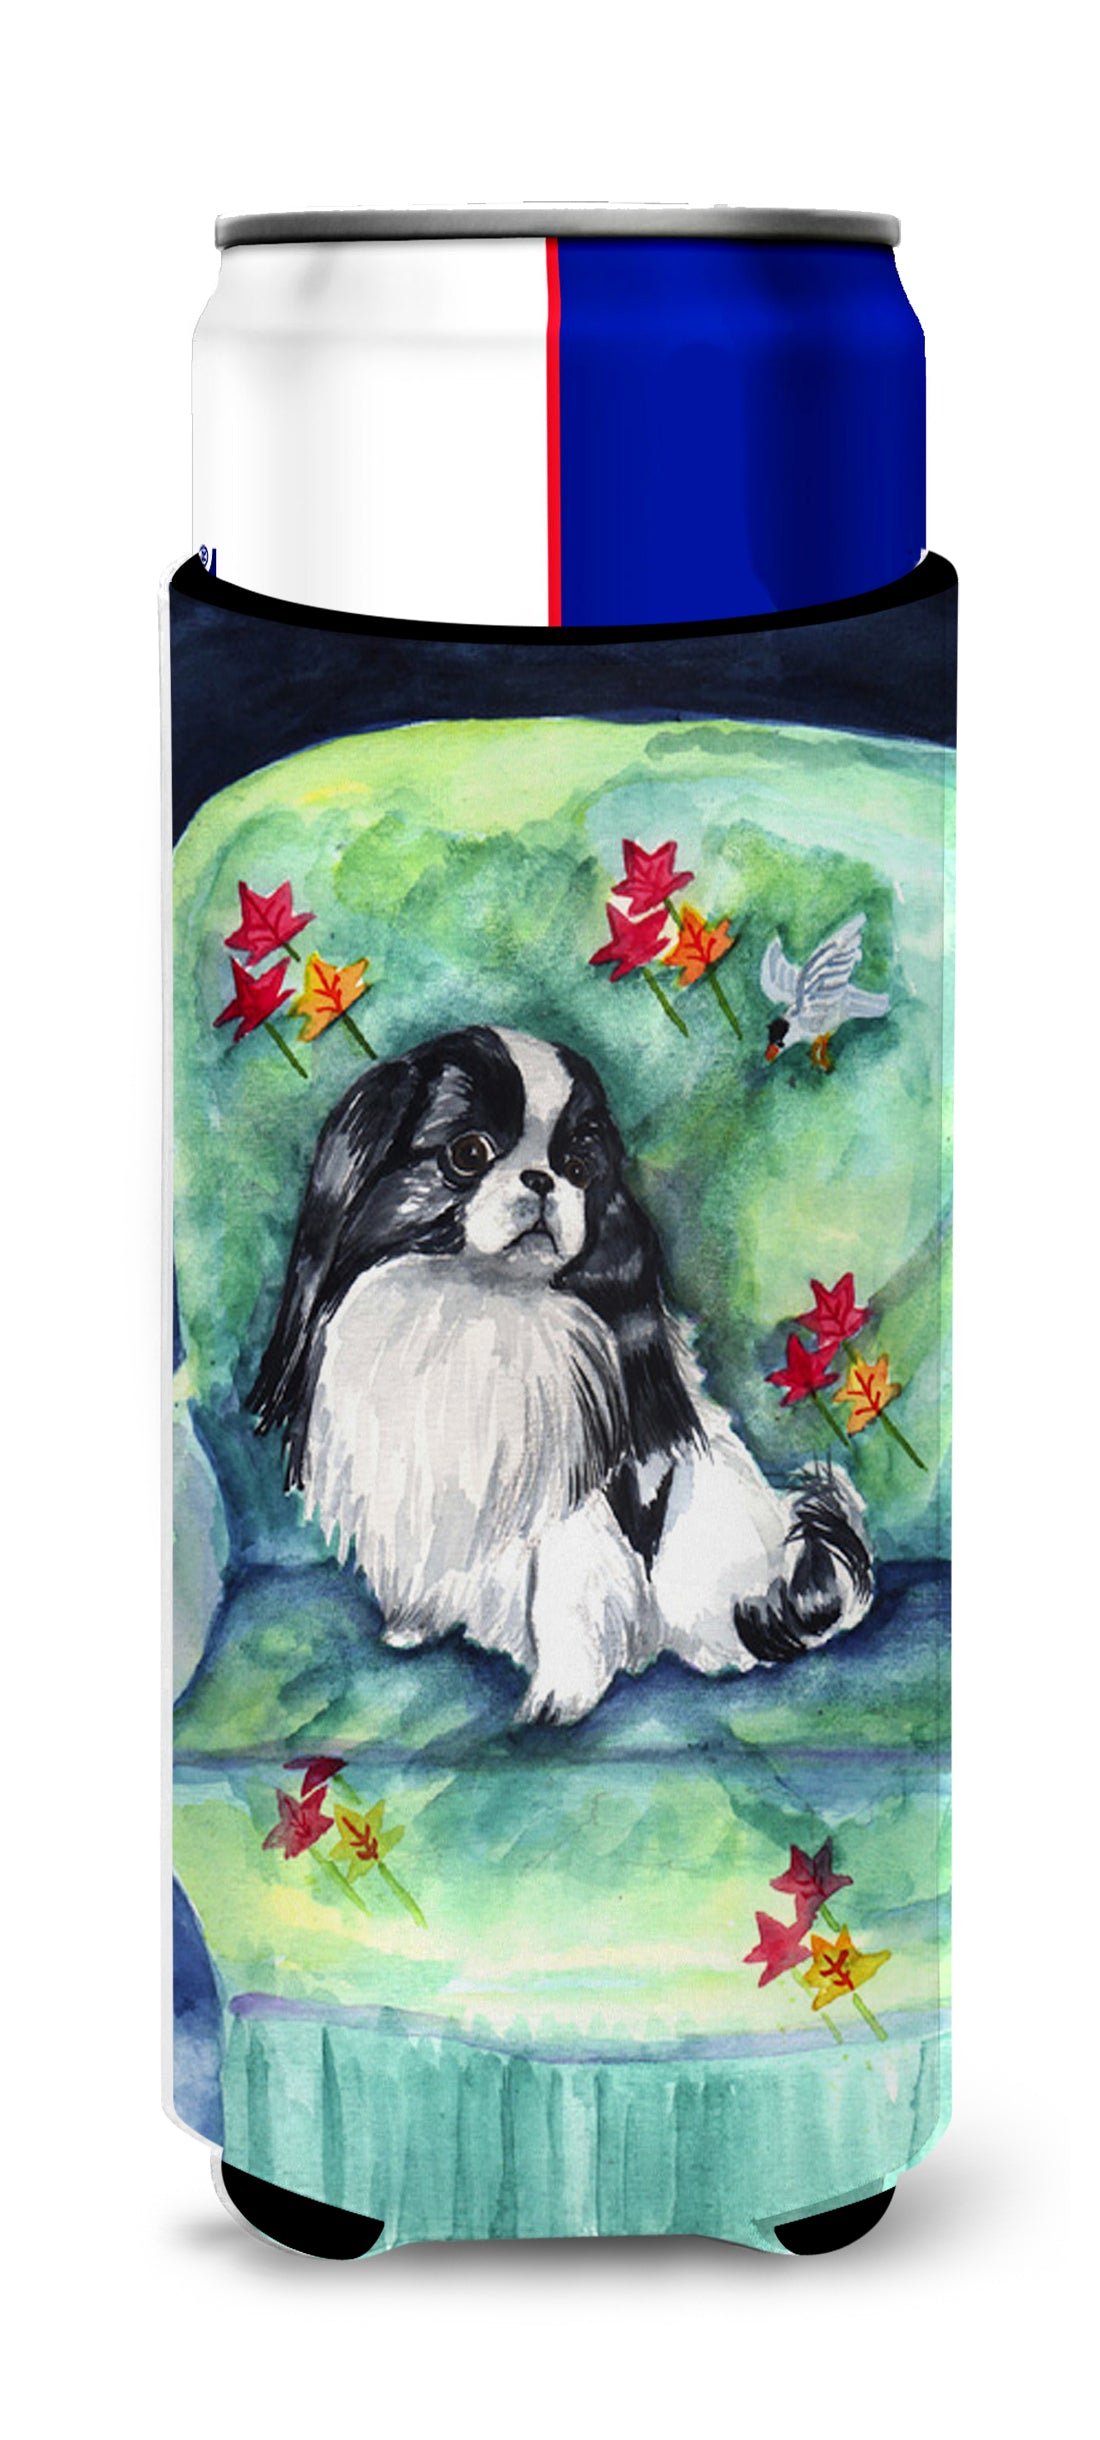 Japanese Chin in Momma's Chair Ultra Beverage Insulators for slim cans 7034MUK.